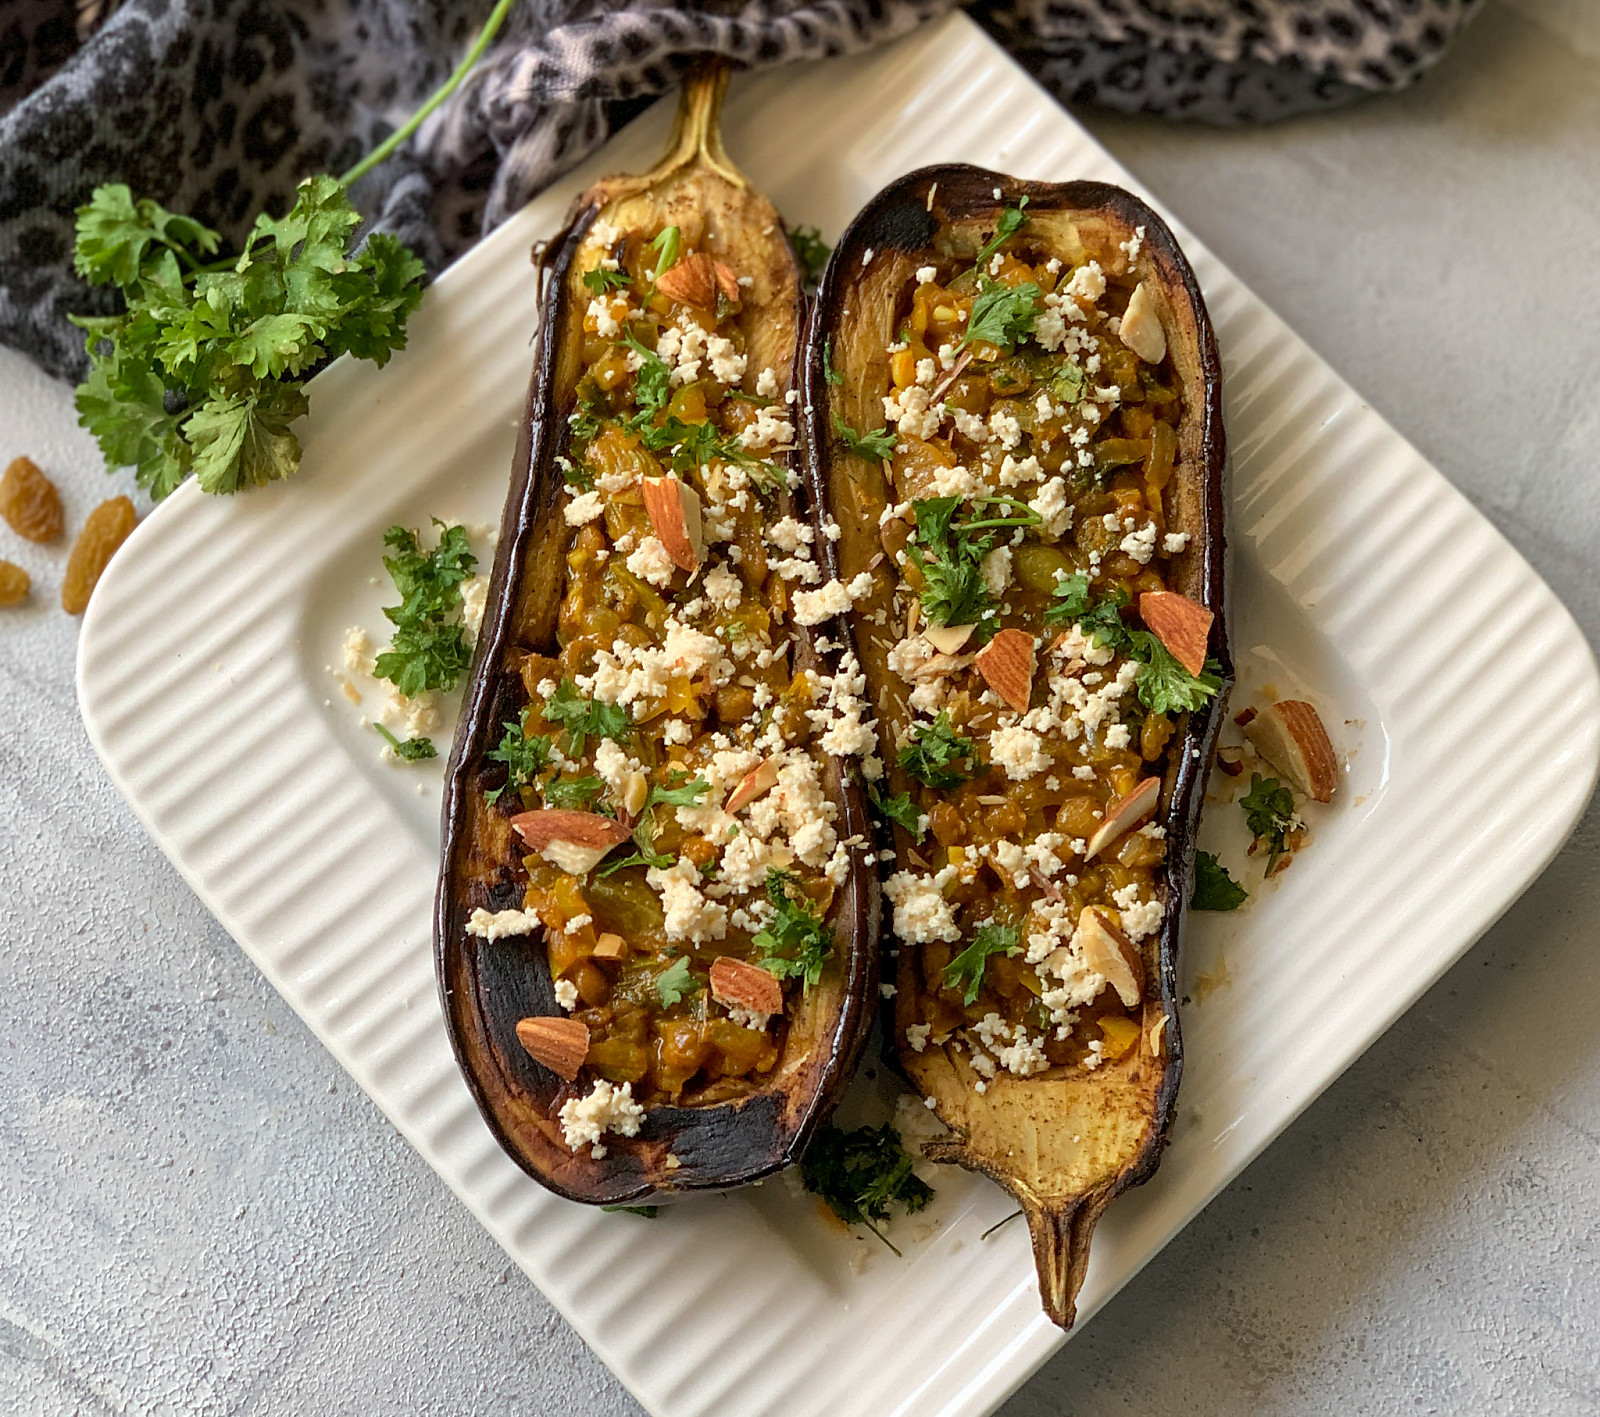 Moroccan Stuffed Roasted Eggplant Recipe by Archana's Kitchen